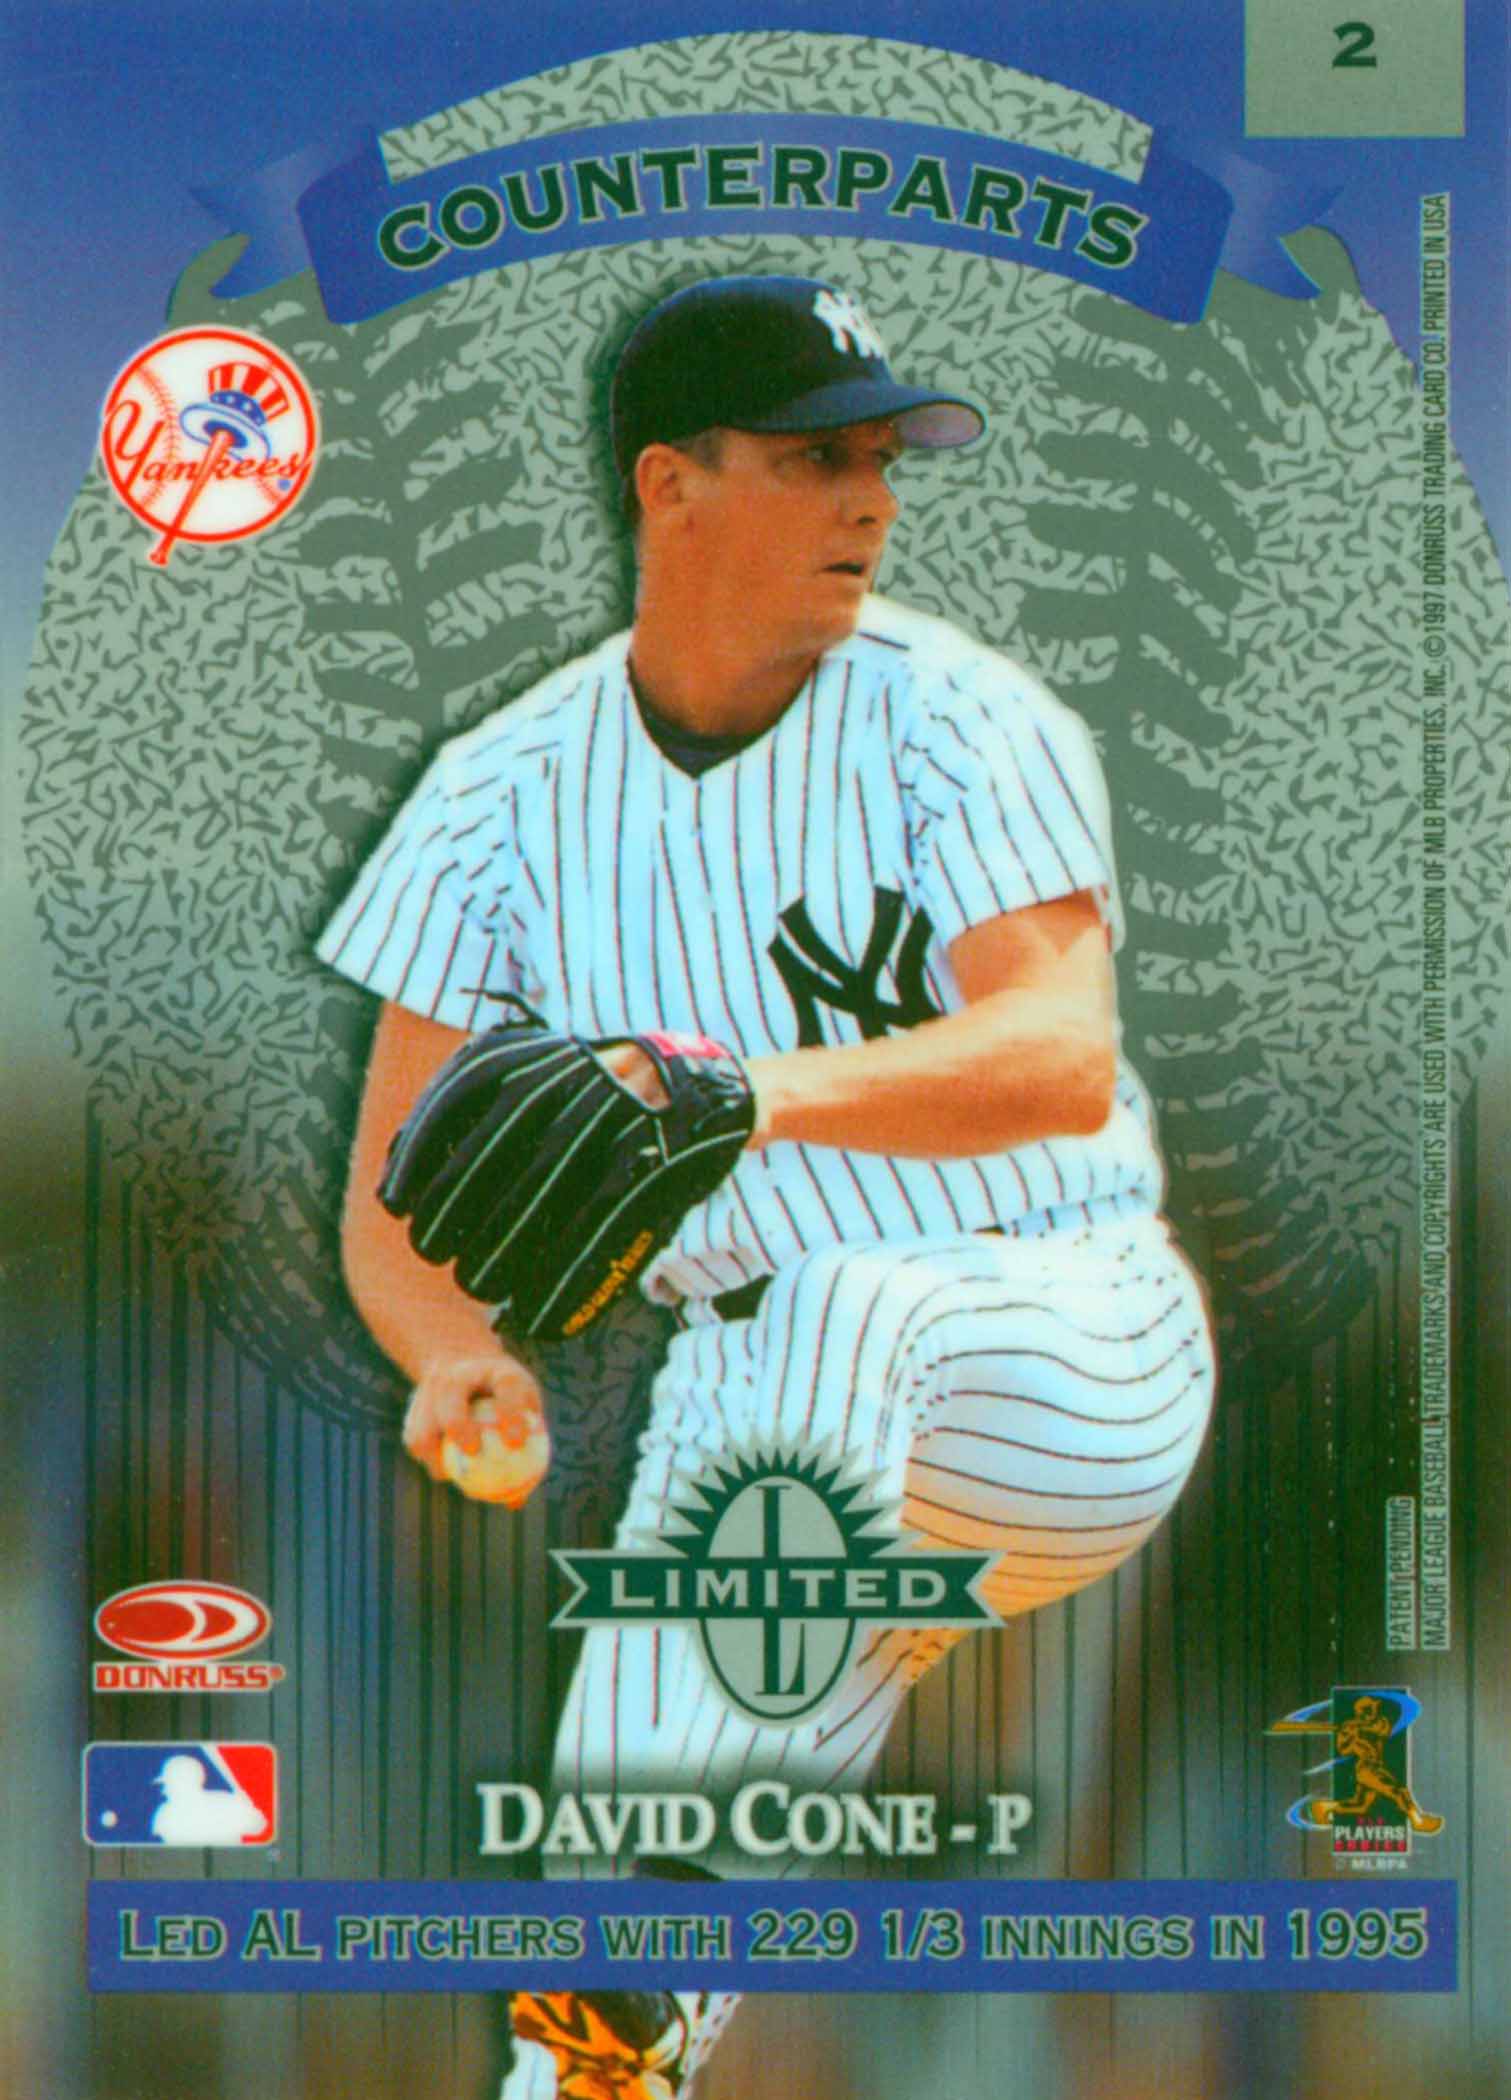 1997 Donruss Limited Counterparts